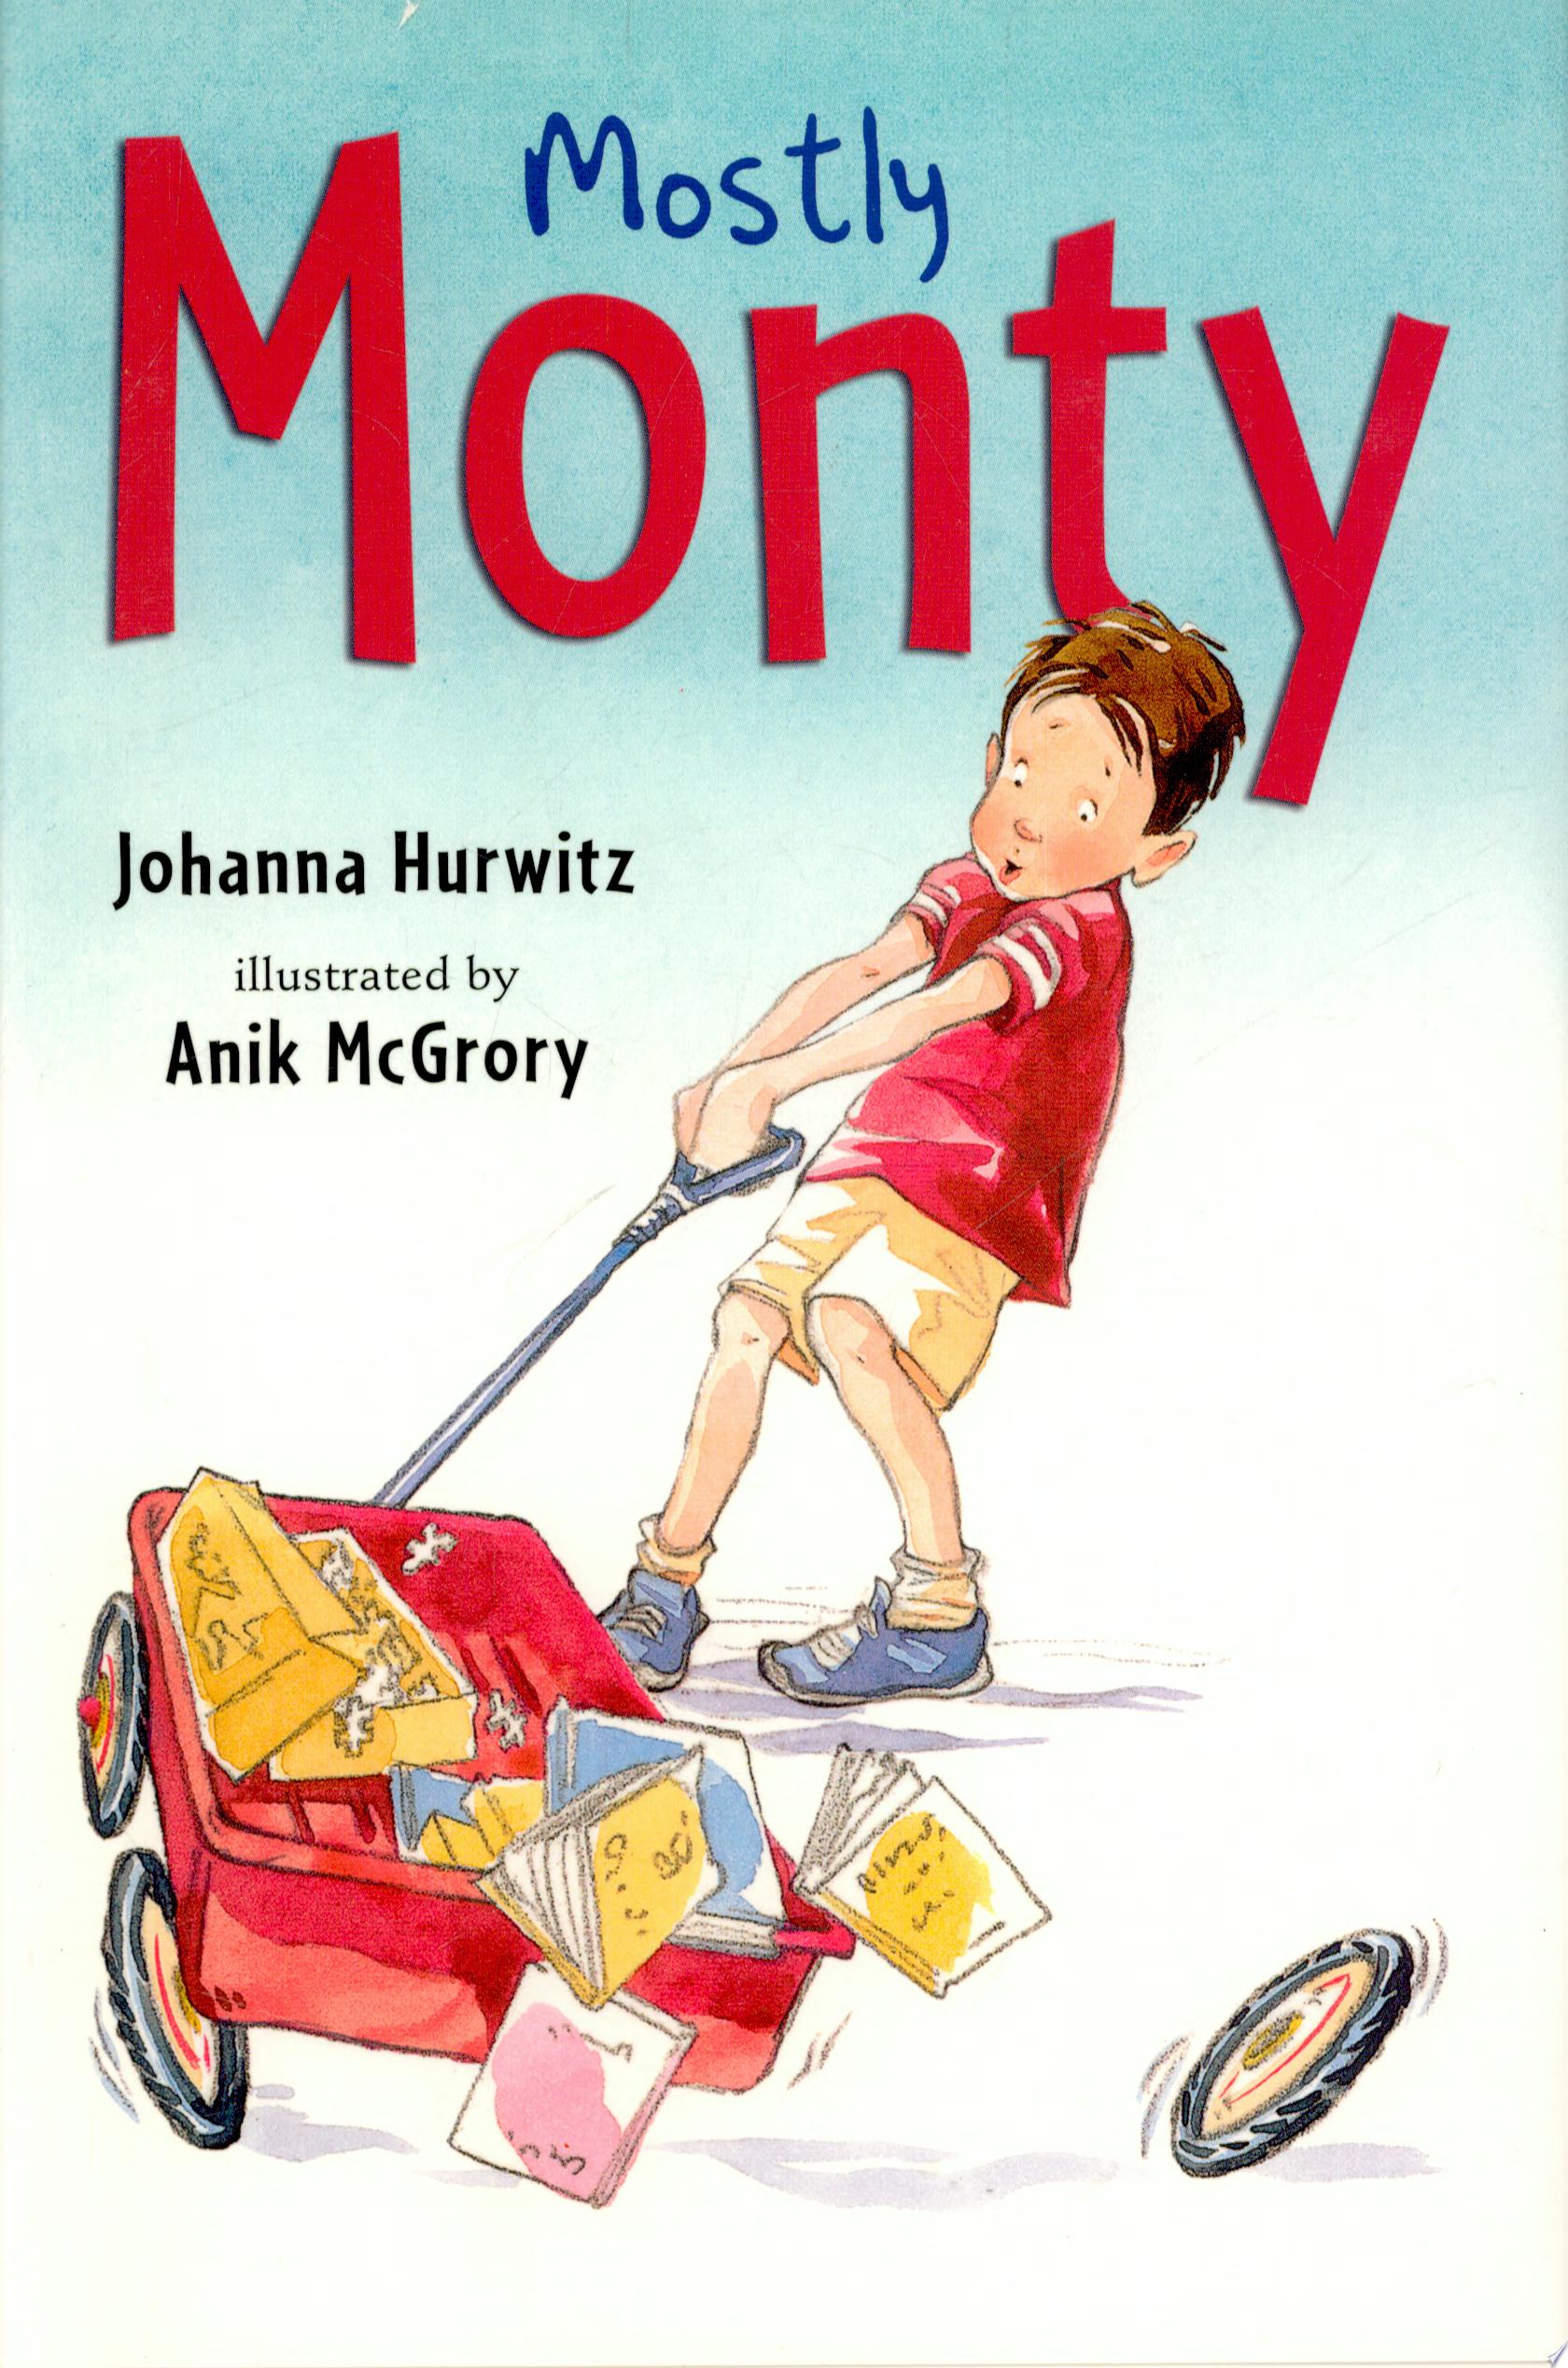 Image for "Mostly Monty"